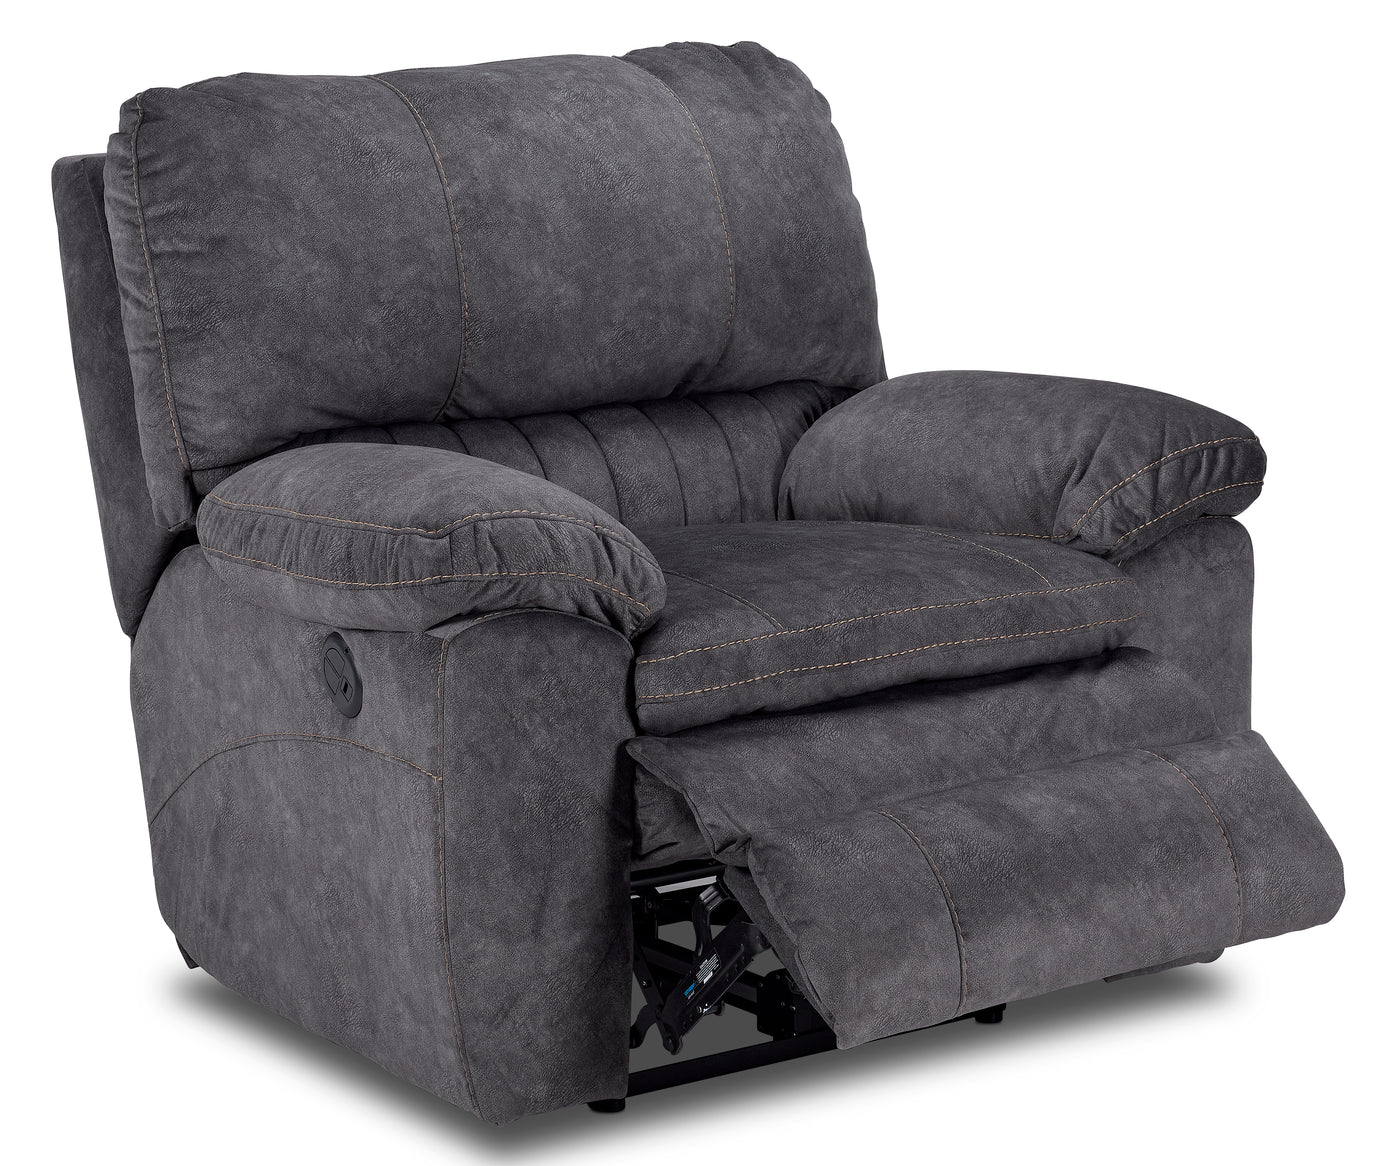 Reyes Power Reclining Sofa, Loveseat and Chair Set - Grey